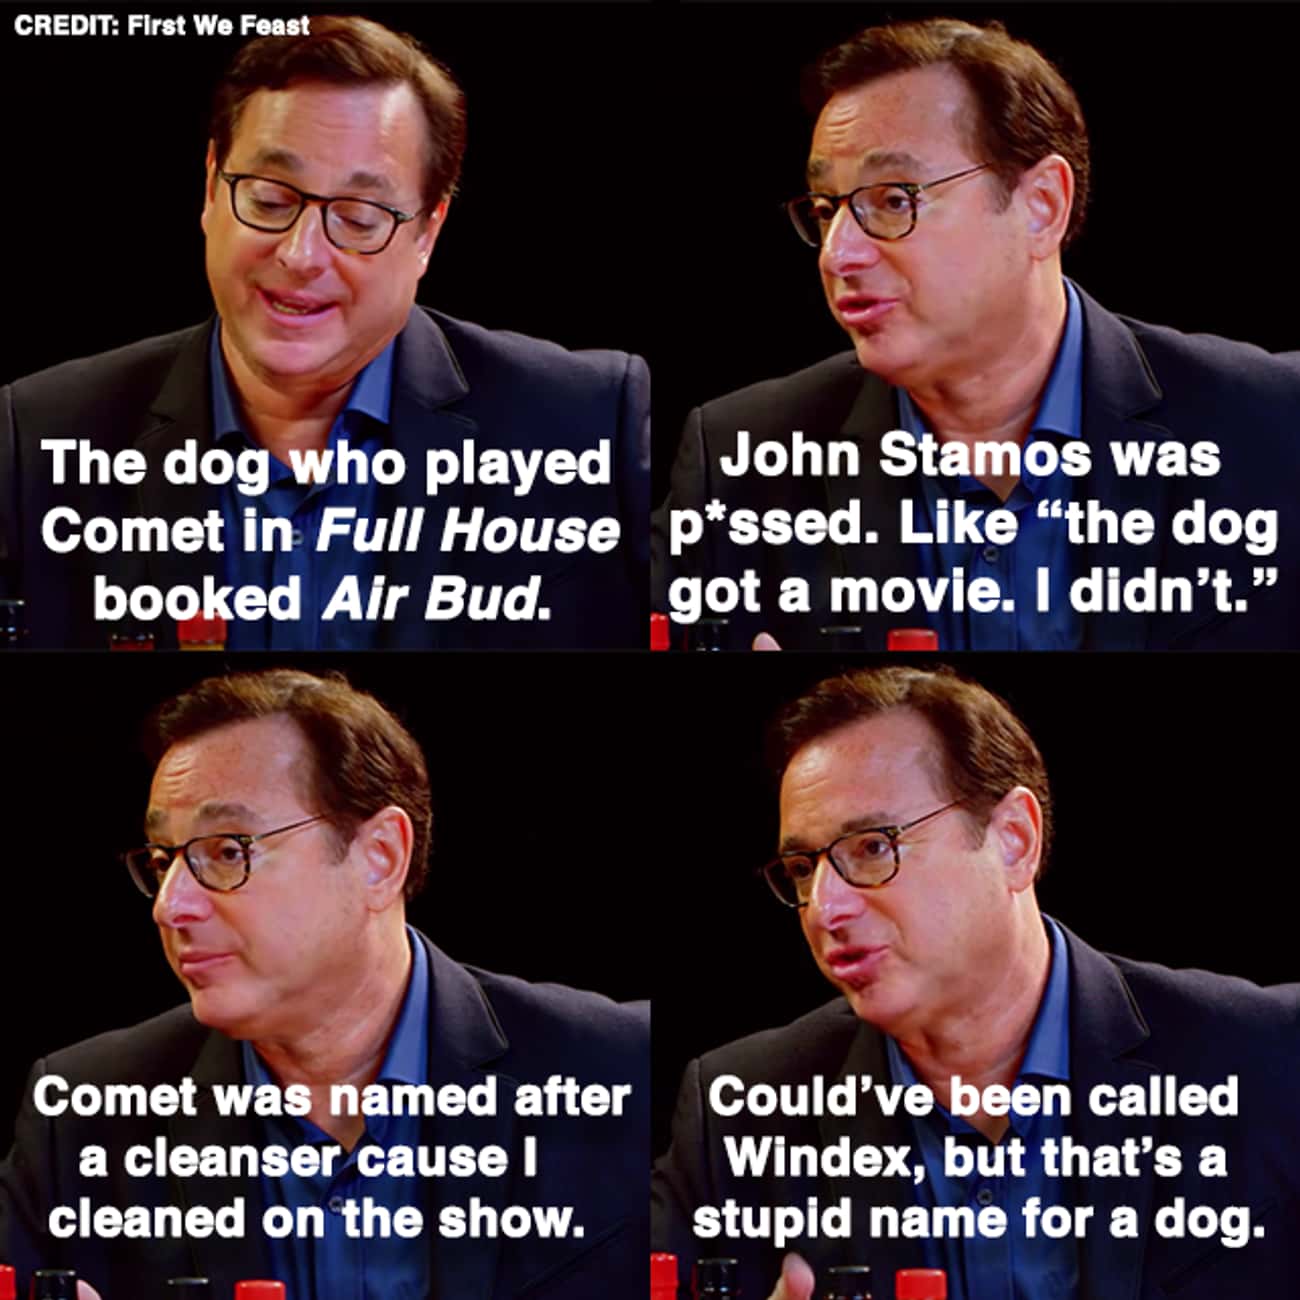 When He Talked About Comet Booking 'Air Bud'